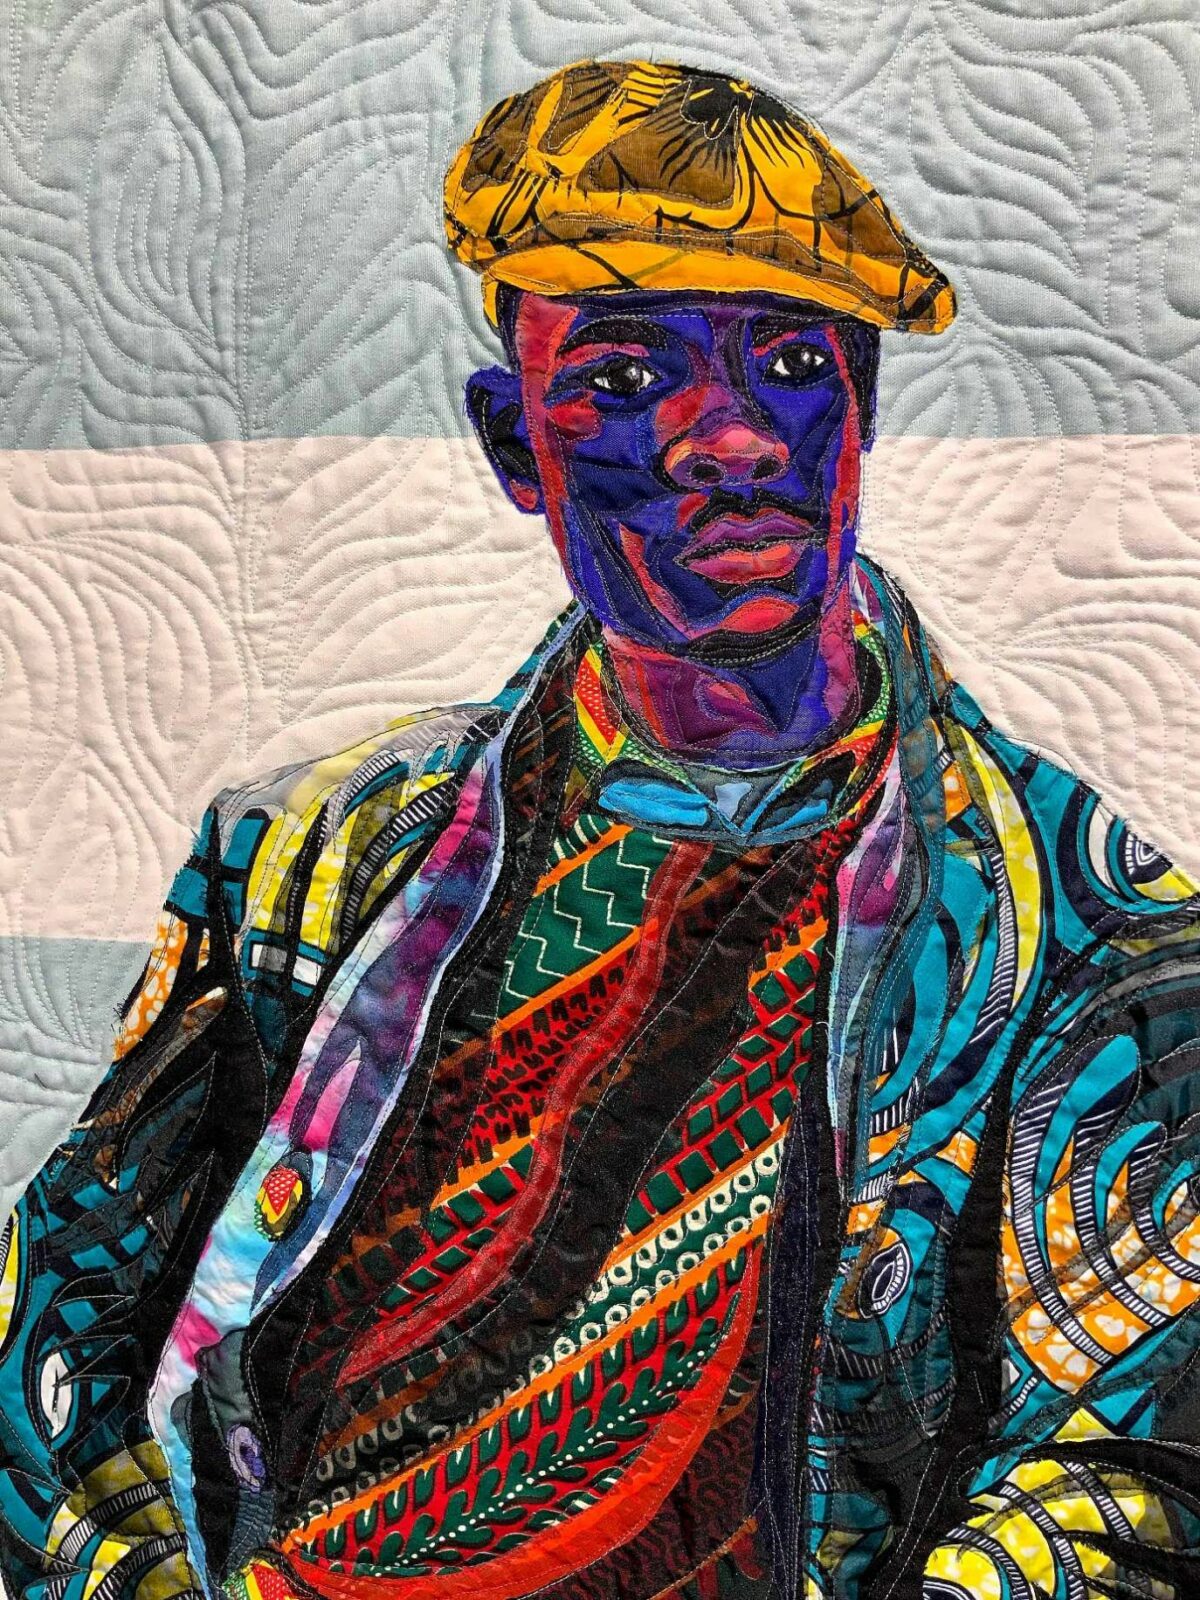 Vibrant Portraits Painted With Patterned Fabrics By Bisa Butler 8